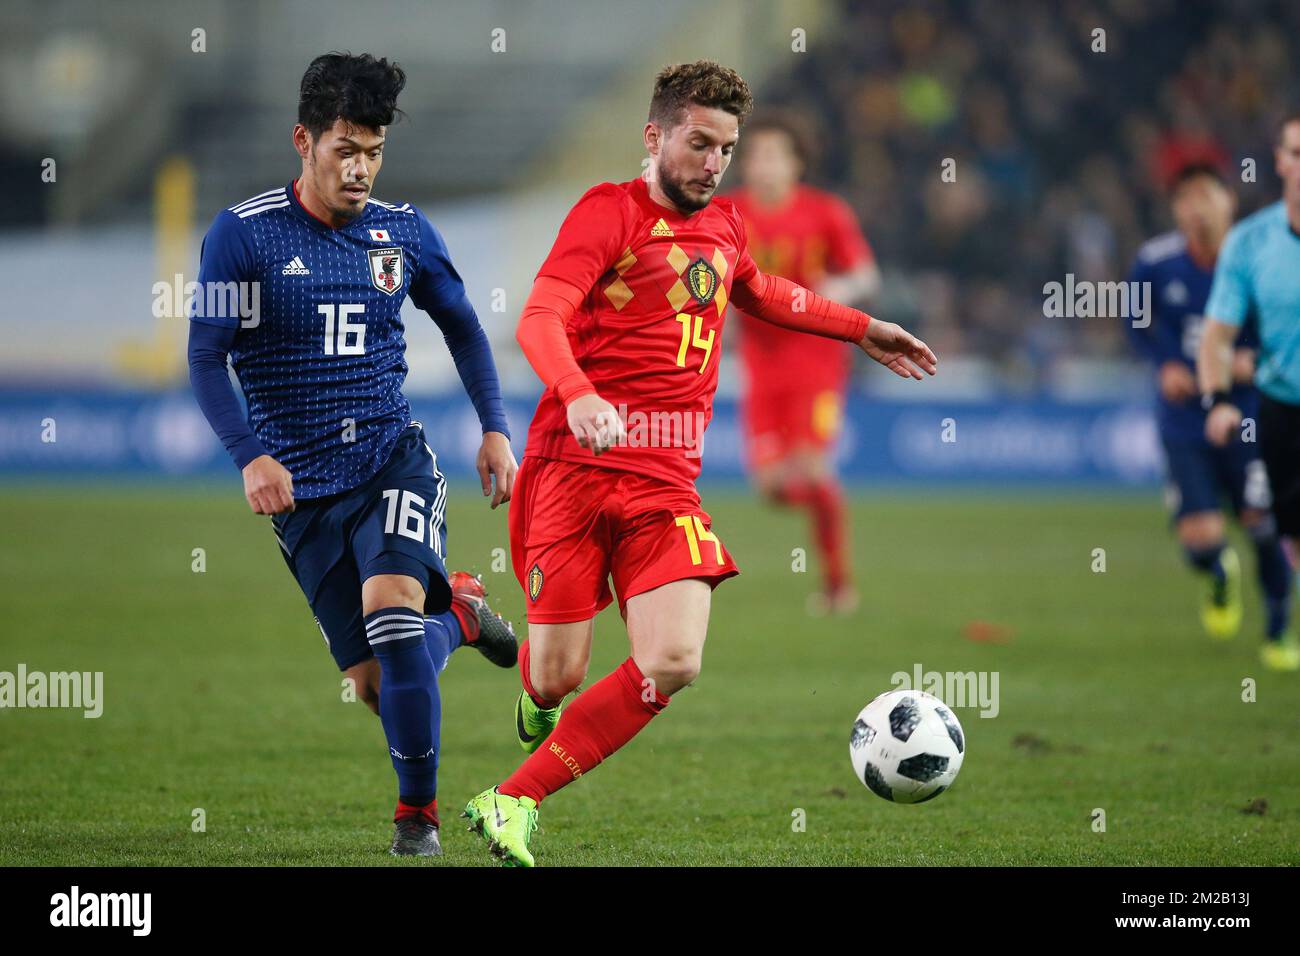 Japan's midfielder Hotaru Yamaguchi and Belgium's Dries Mertens fight for the ball during a friendly soccer game between Belgian national team Red Devils and Japan, Tuesday 14 November 2017, in Brugge. BELGA PHOTO BRUNO FAHY Stock Photo